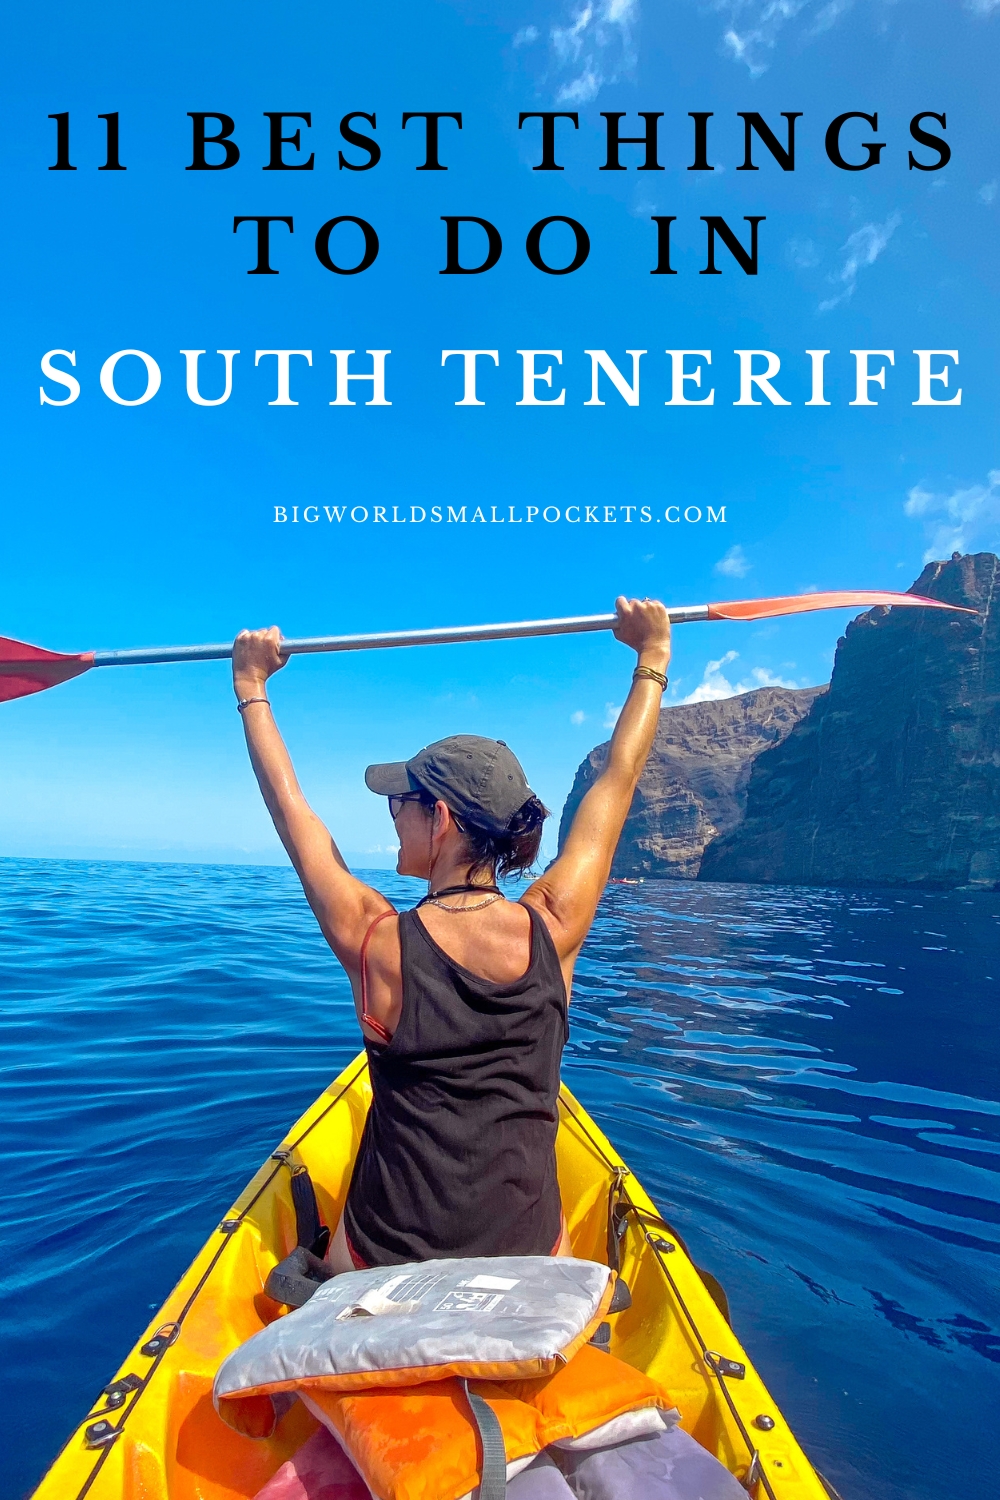 Top 11 Things to Do in South Tenerife